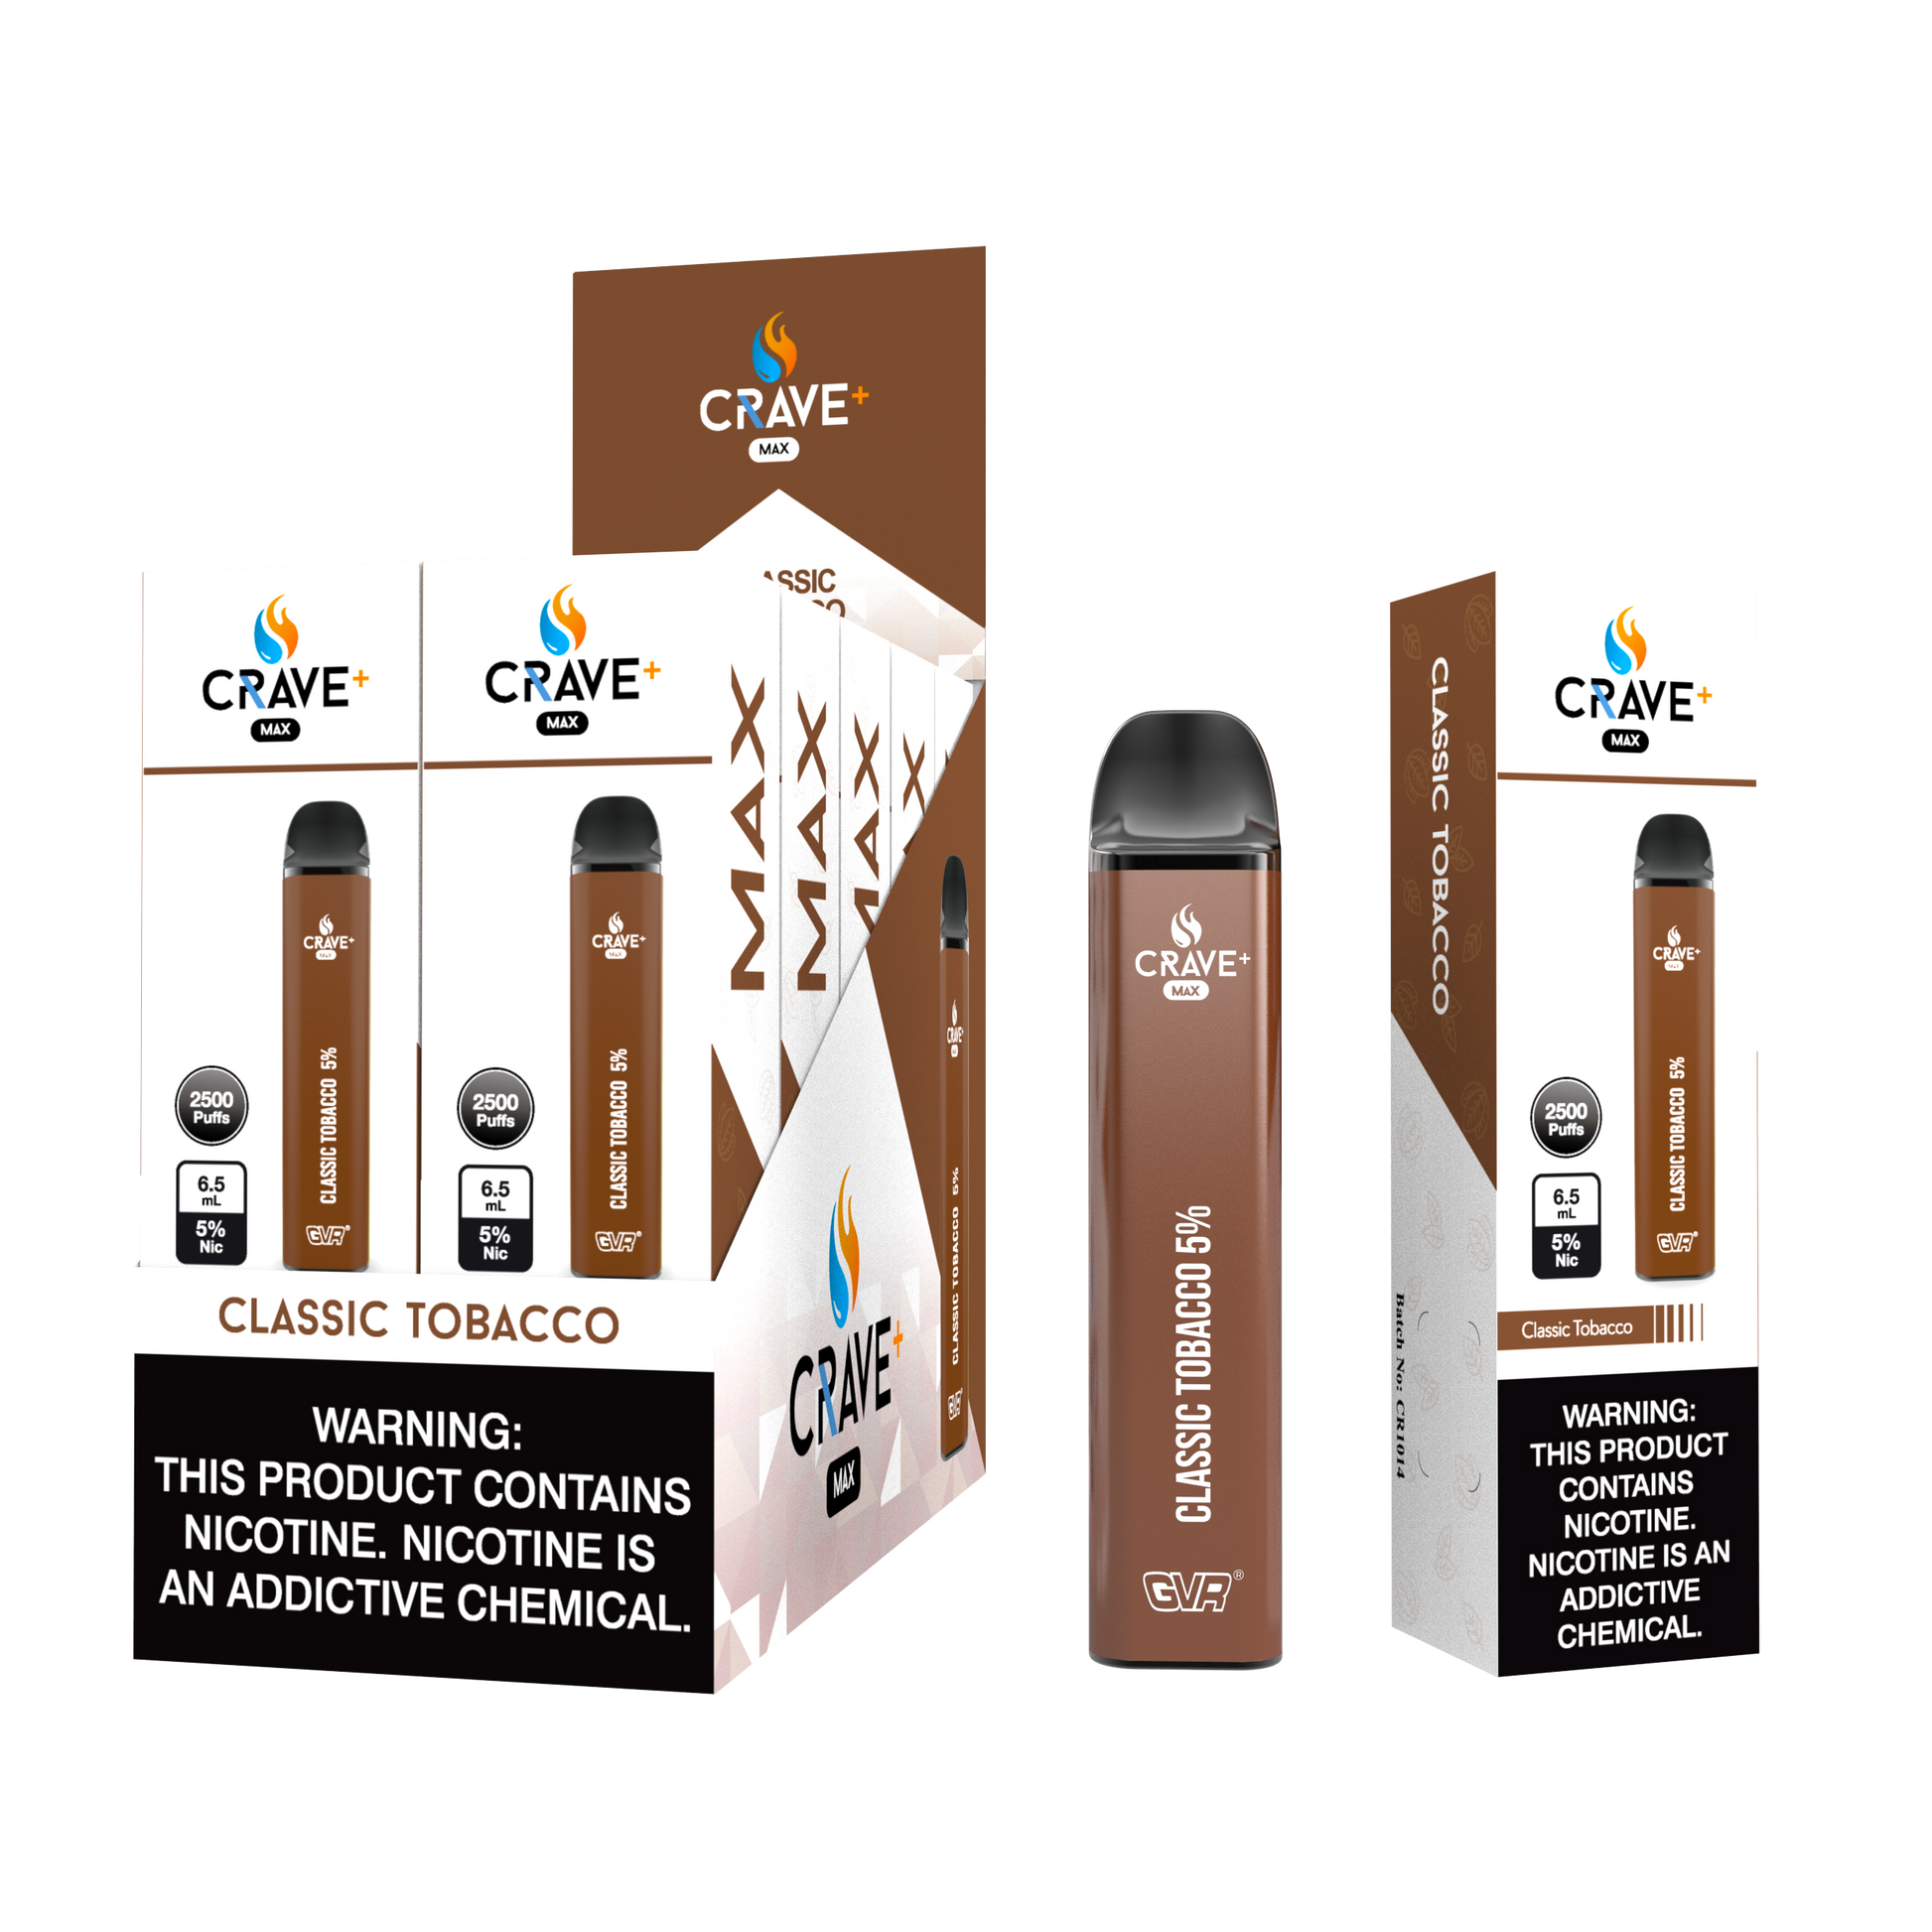 crave max, crave vape, buy crave max, crave max for sale, crave max flavors, crave flavors vape, buy crave vape online, crave max gvr, crave 2500 puffs, crave clear, crave max clear, crave clear 3%, crave clear 5%, crave max 3%, crave max 5%, crave max classic tobacco, classic tobacco crave max, tobacco crave max, classic tobacco 3% vape, classic tobacco crave max, crave max disposable